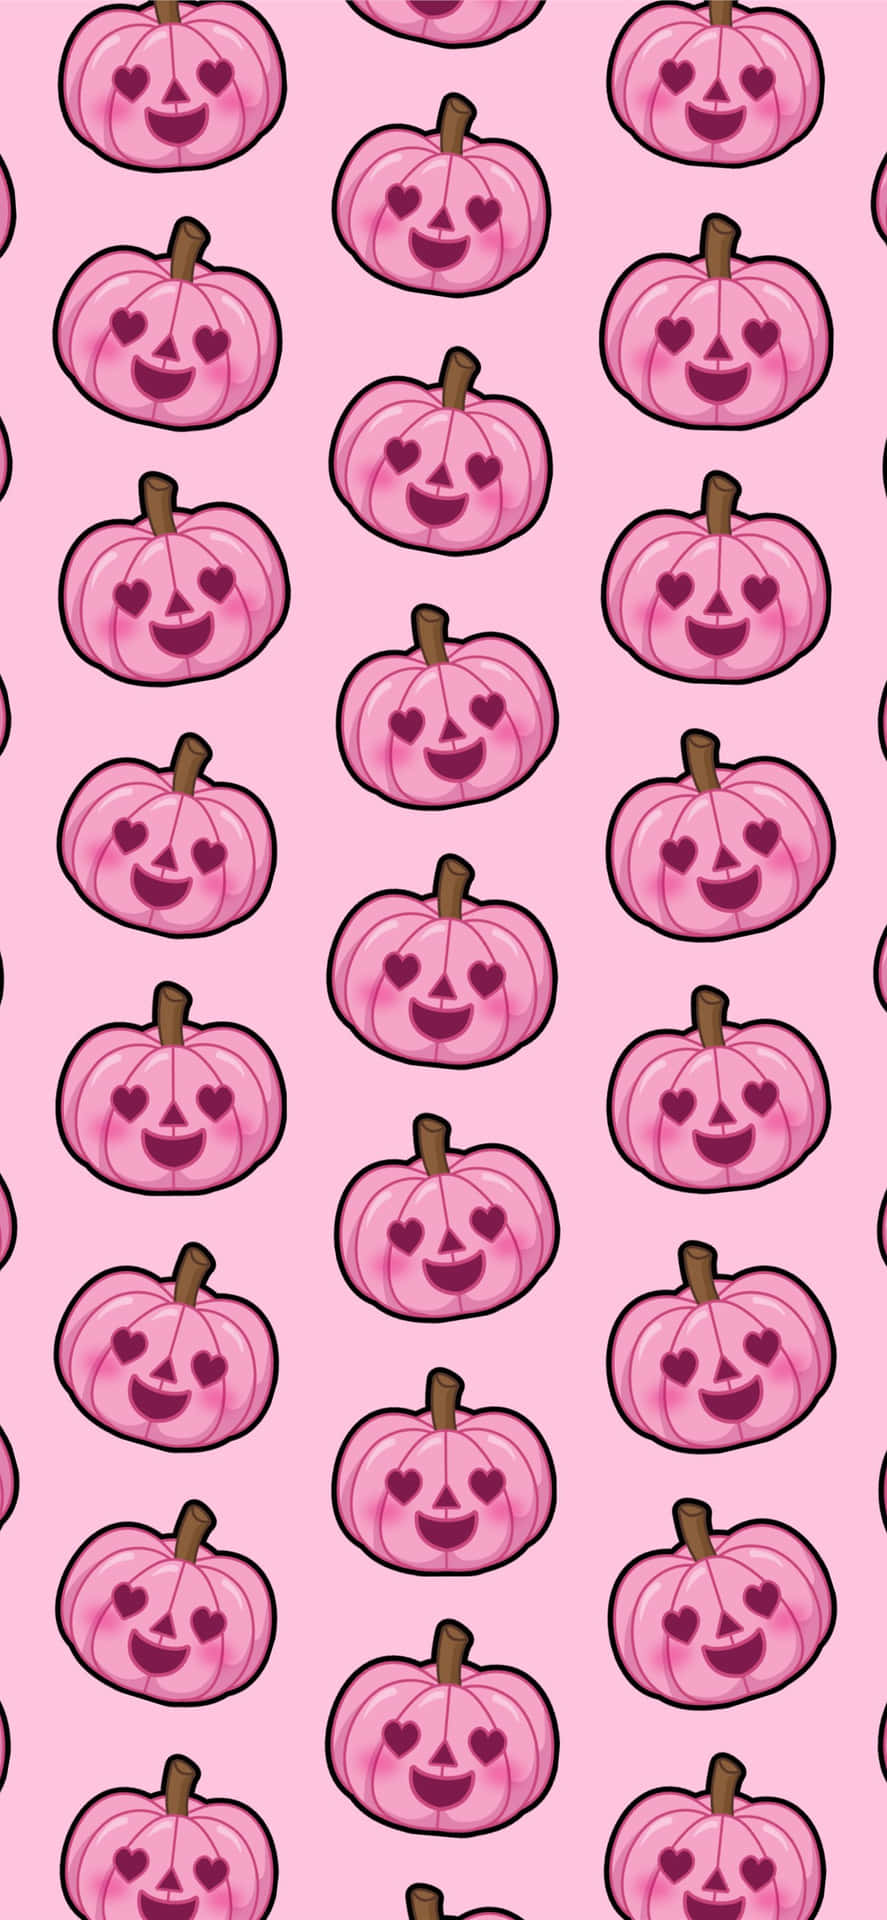 Get Into The Spirit Of Halloween With This Fun, Girly Costume Wallpaper